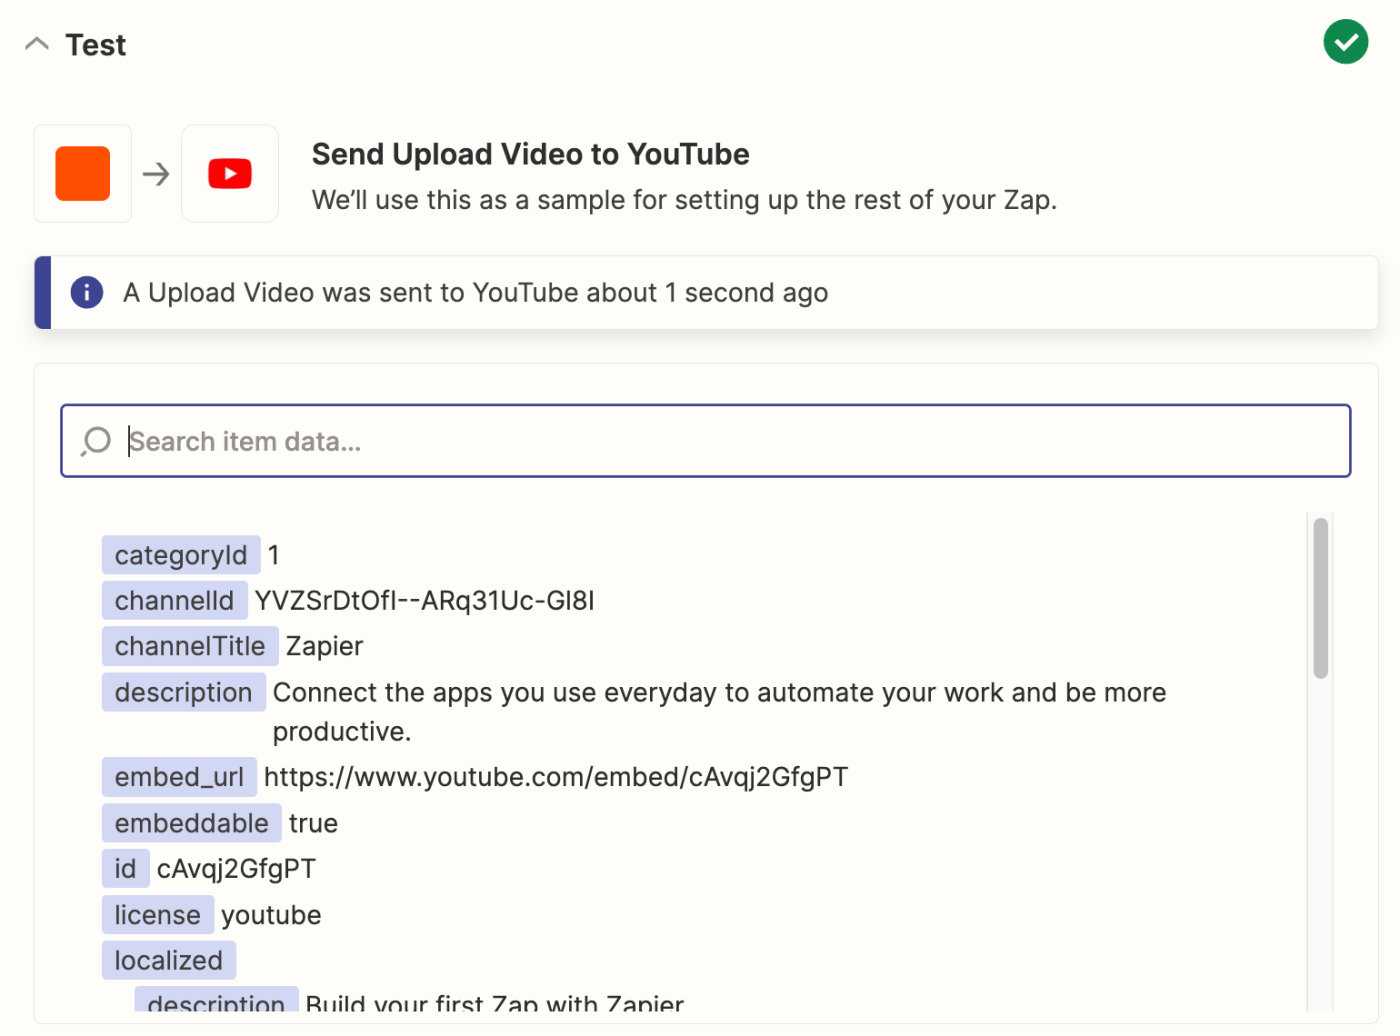 A test step to upload a video in YouTube in the Zap editor.